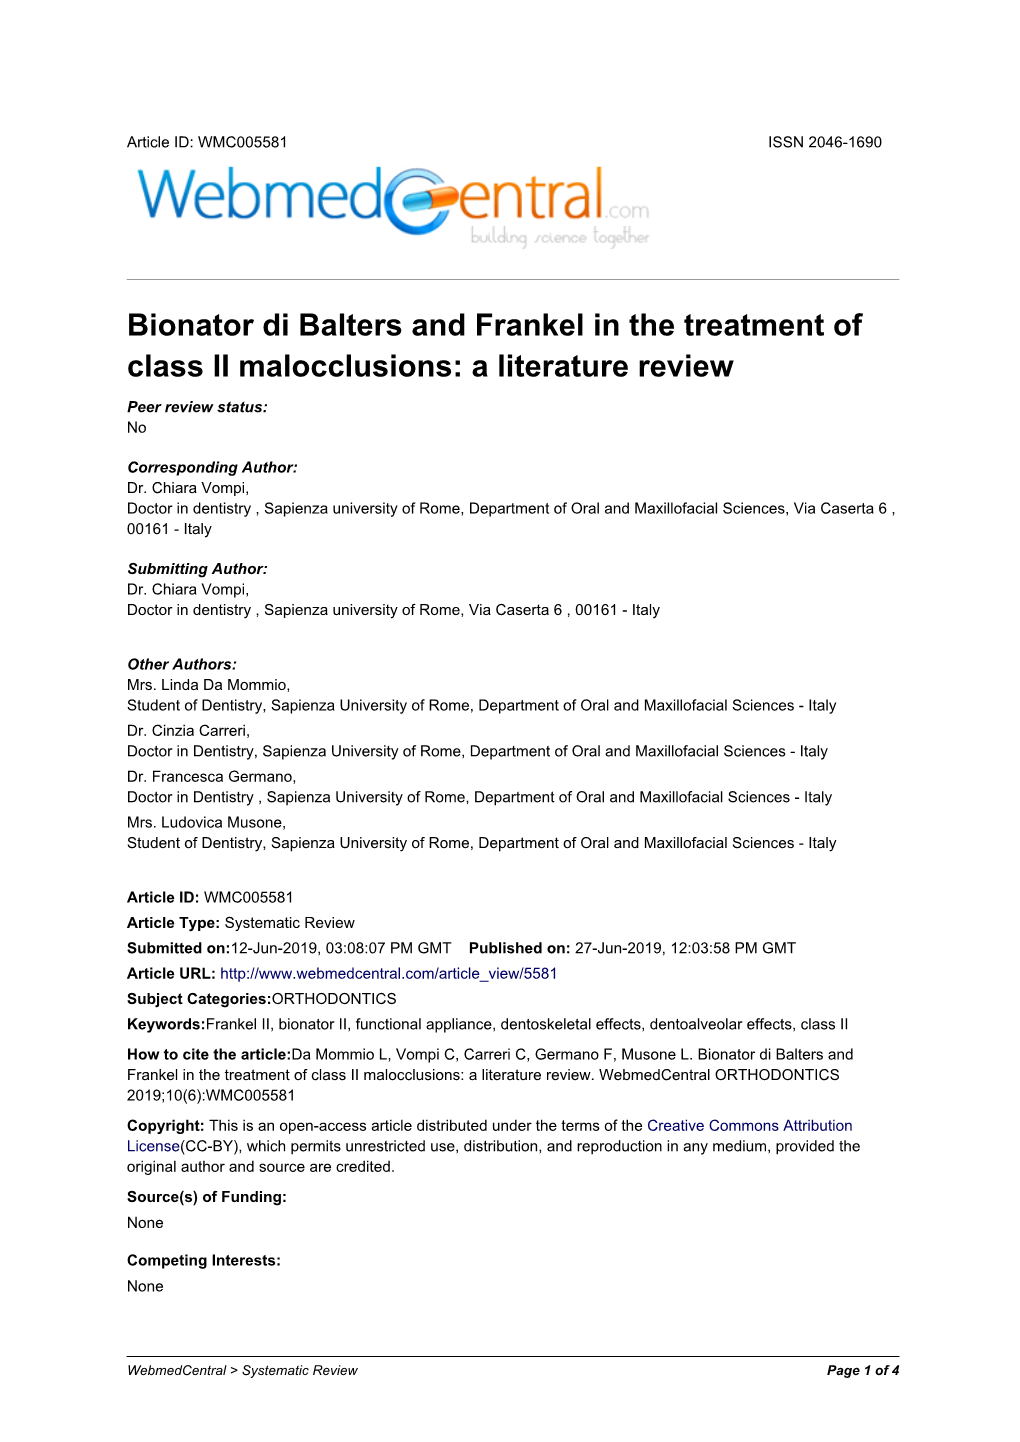 Bionator Di Balters and Frankel in the Treatment of Class II Malocclusions: a Literature Review